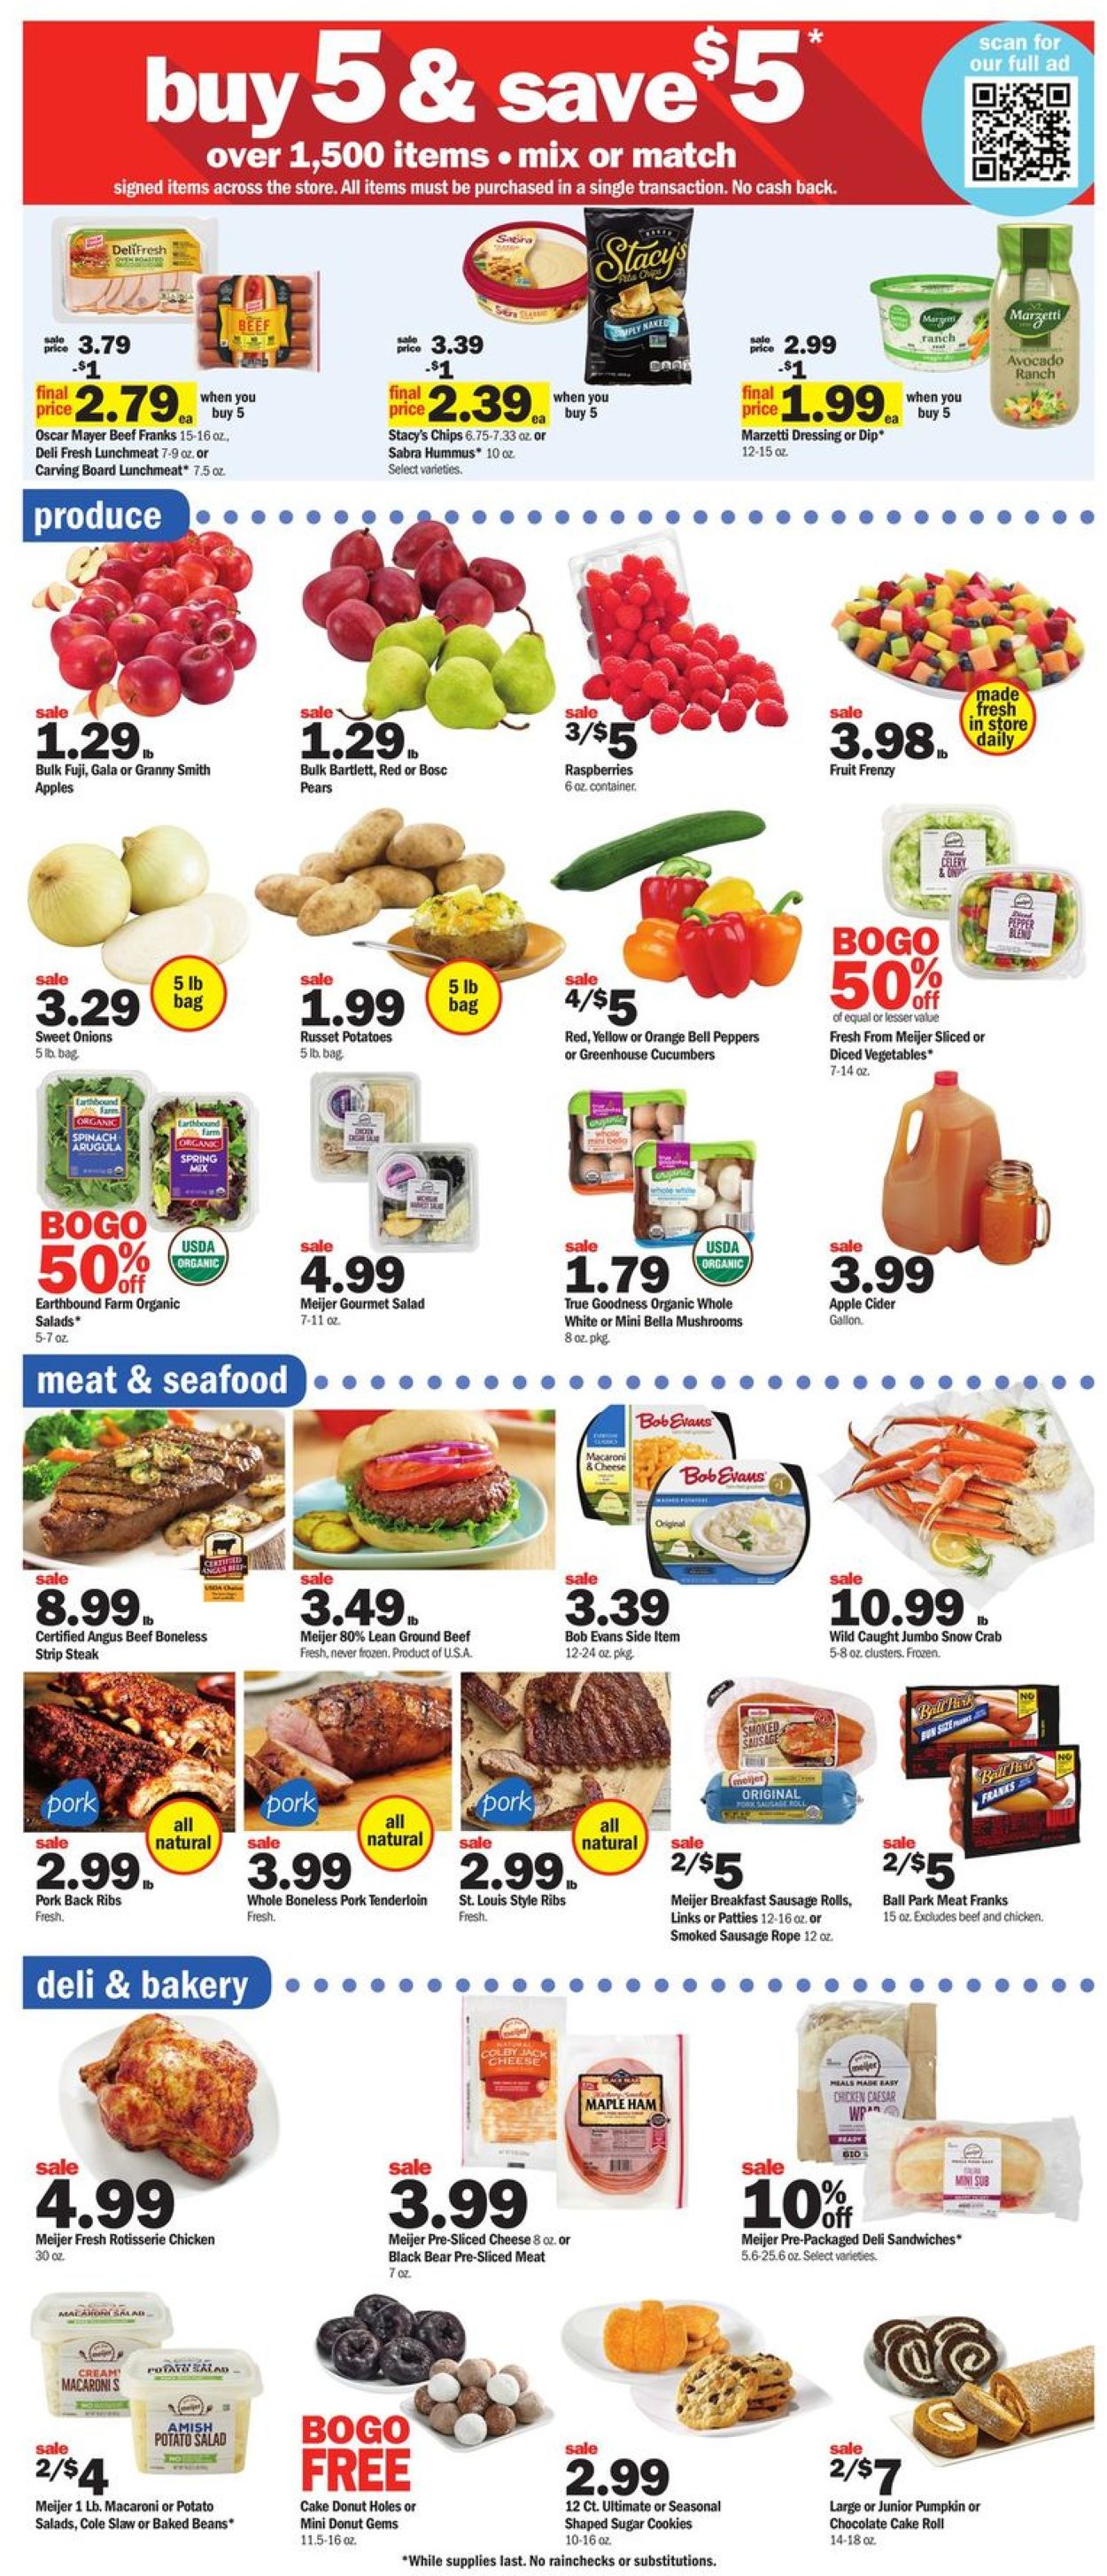 Meijer Current weekly ad 10/18 10/24/2020 [2]